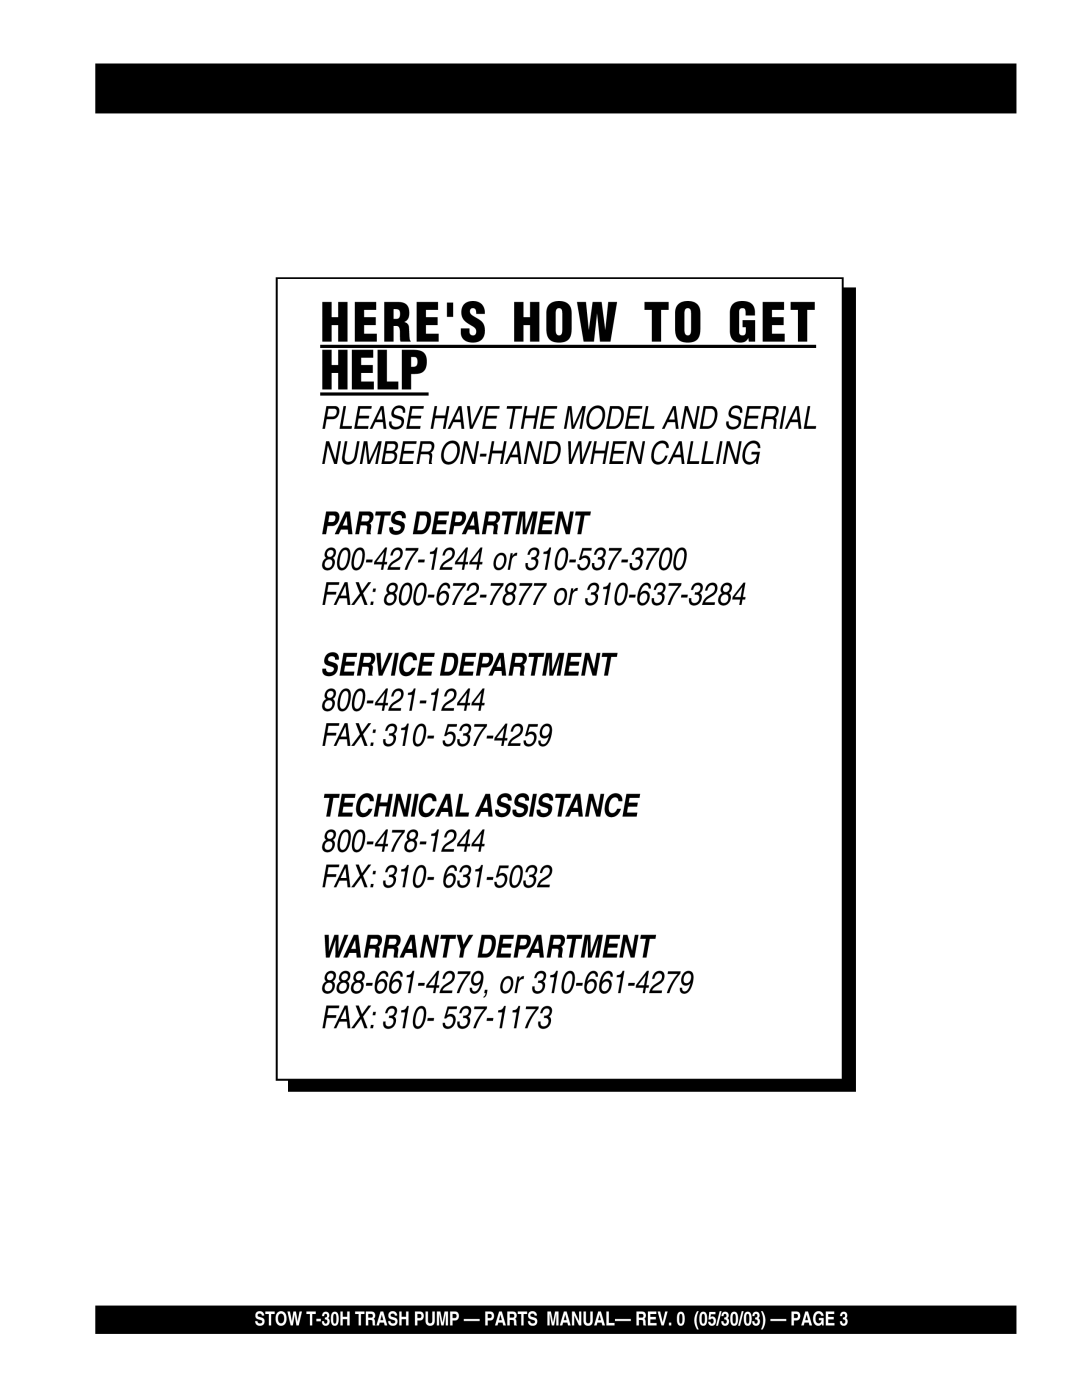 Stow T-30H manual Heres How To Get Help, Parts Department, Fax, Technical Assistance, Service Department 